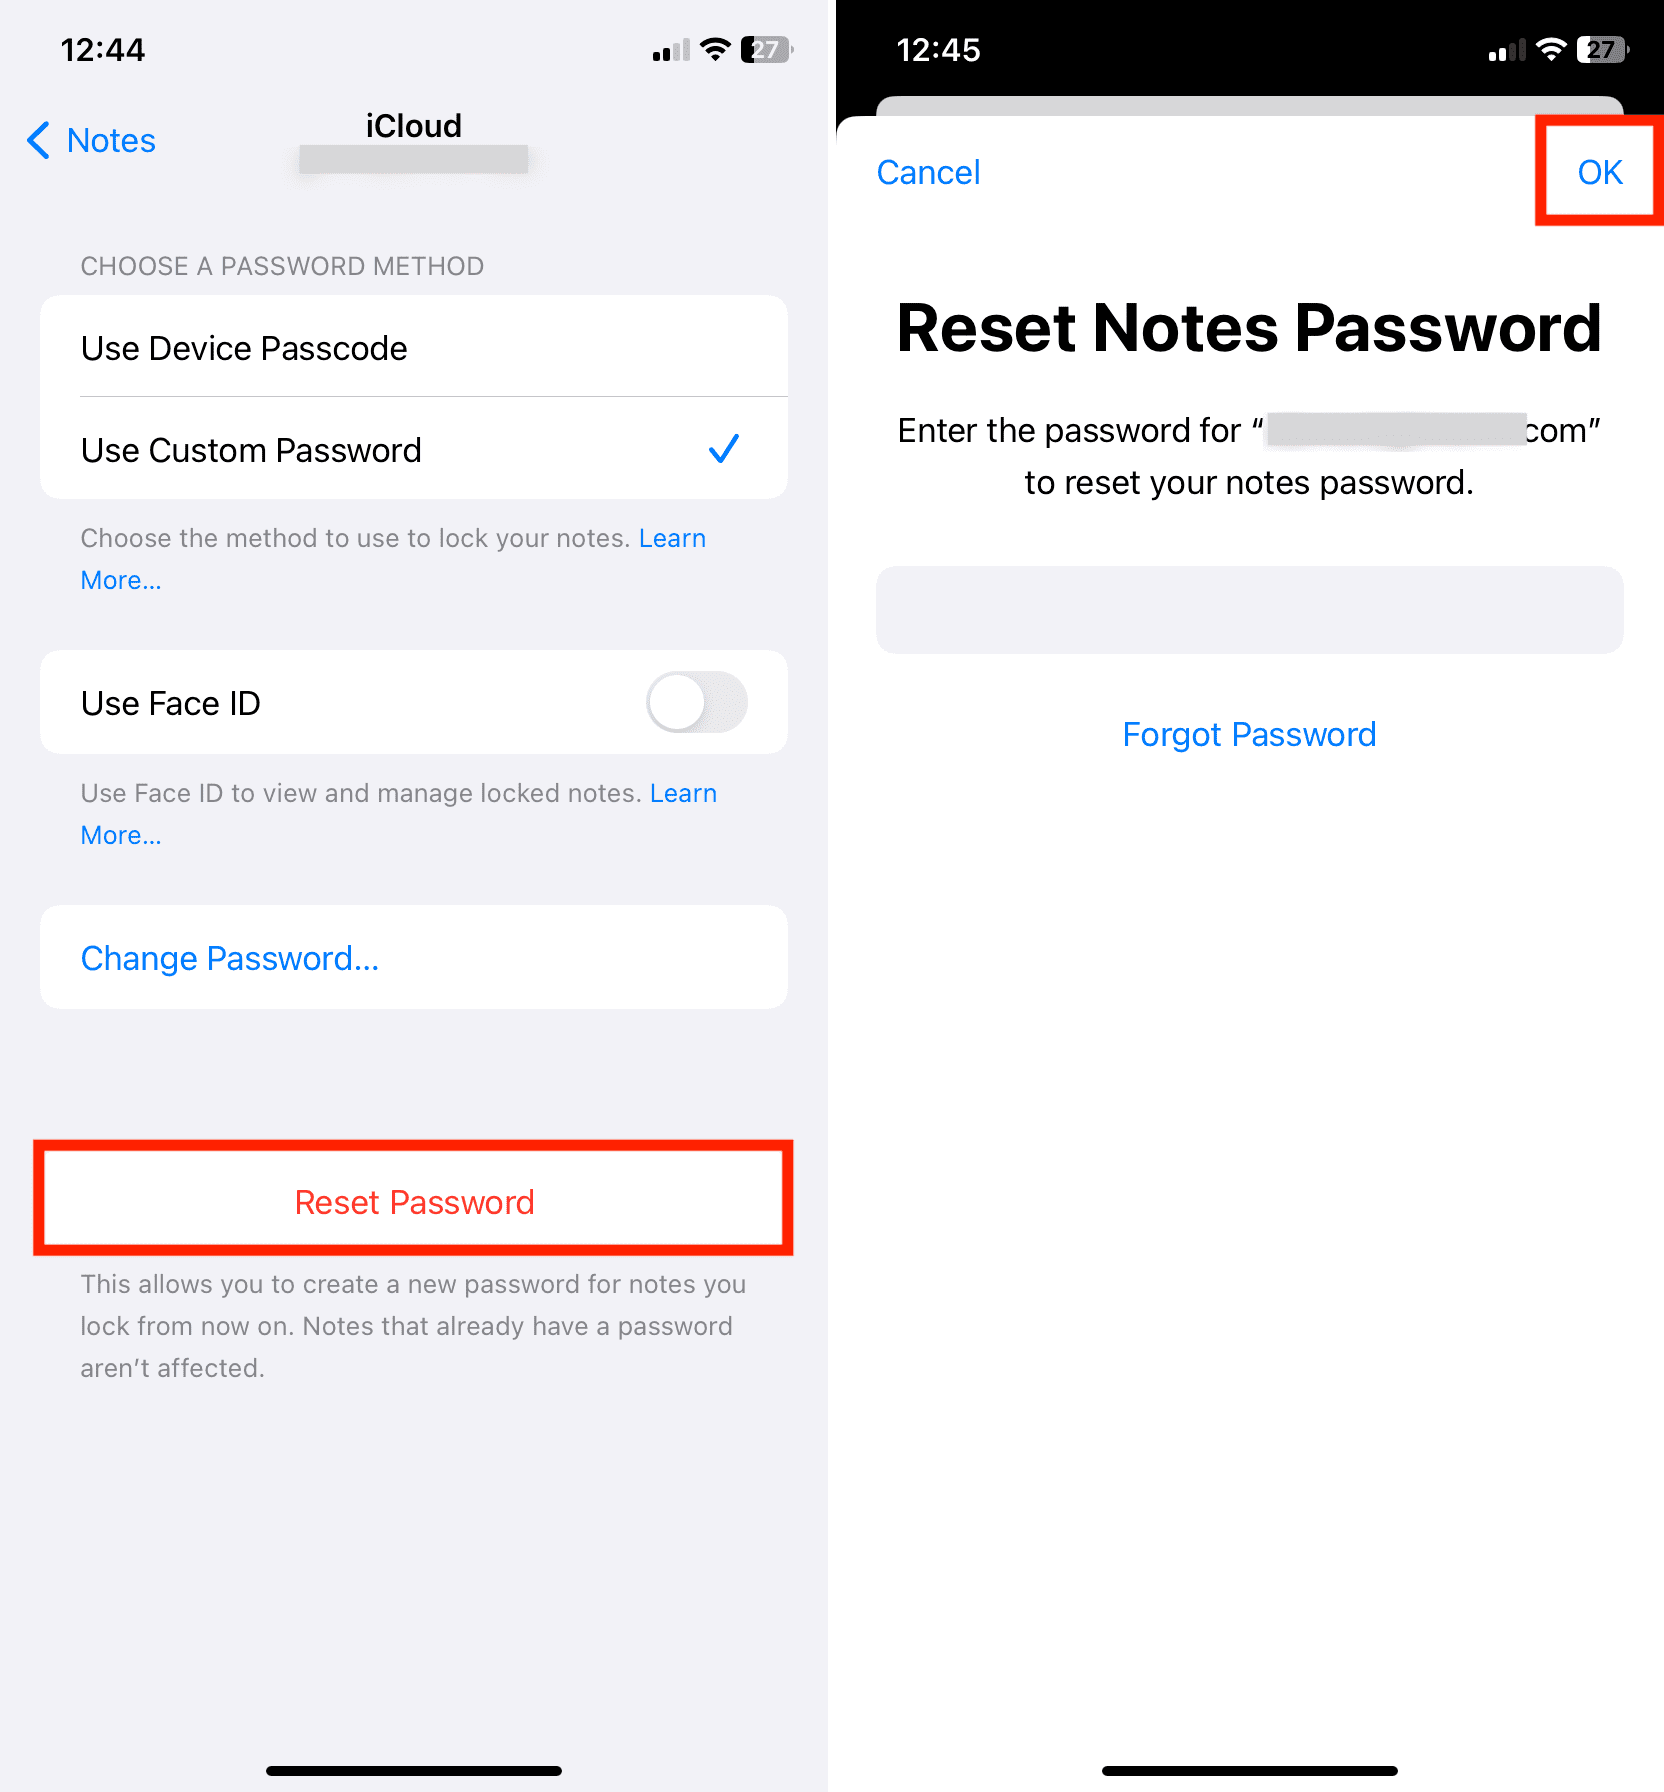 Reset Notes Password by entering Apple ID password on iPhone